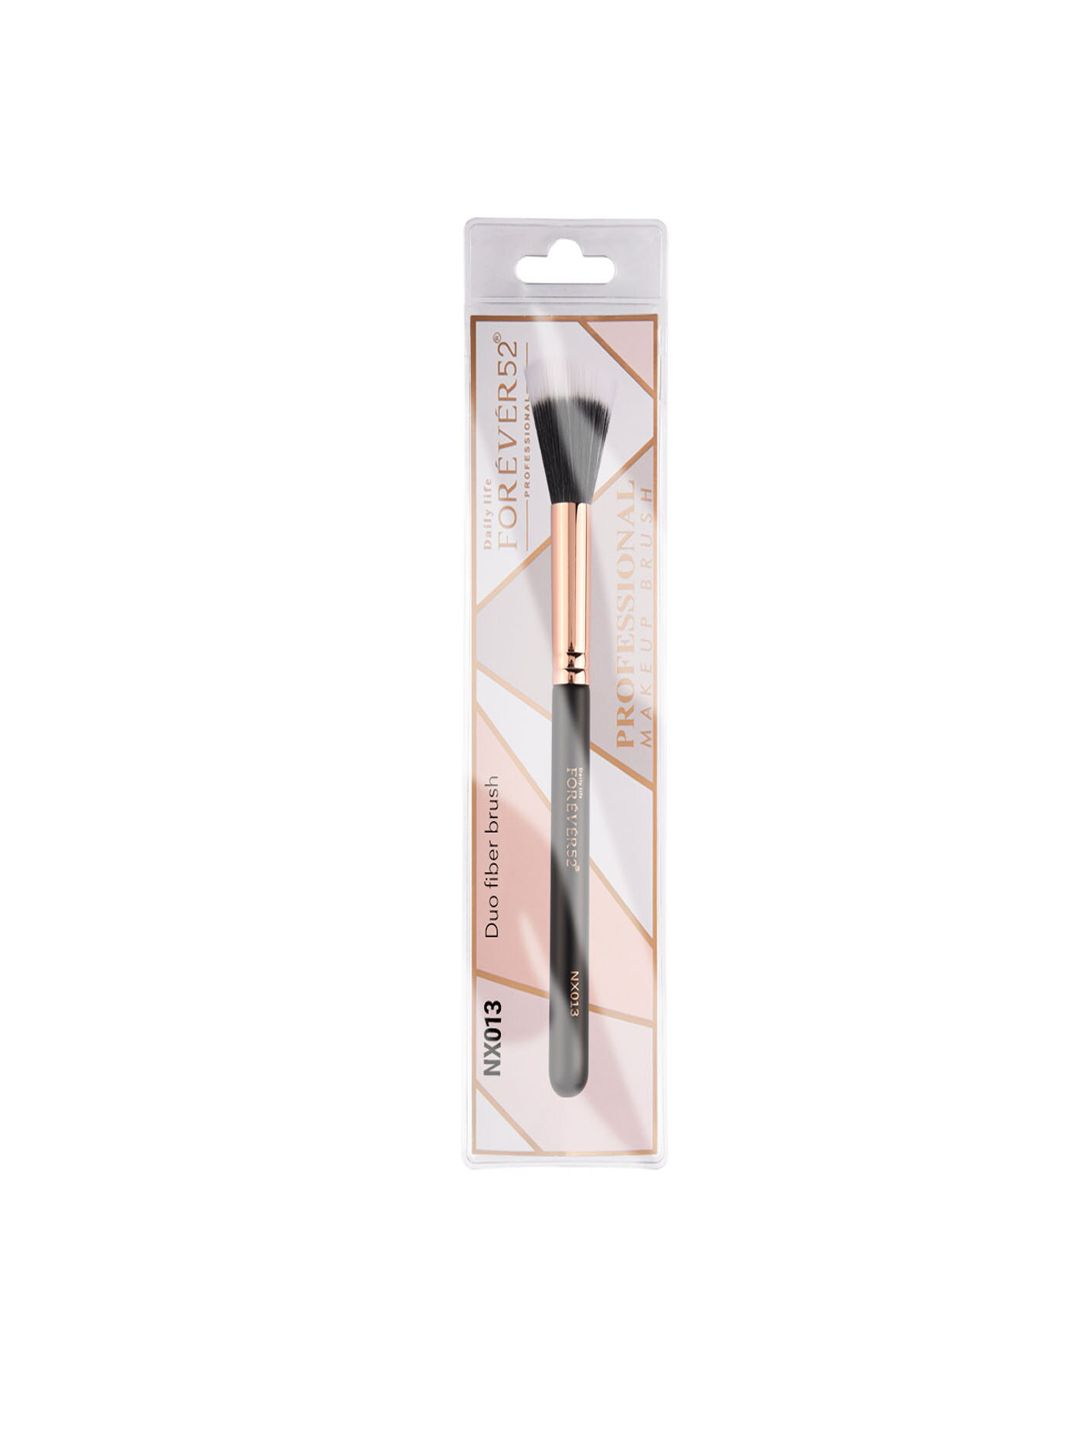 Daily Life Forever52 Duo fiber brush NX013 Price in India